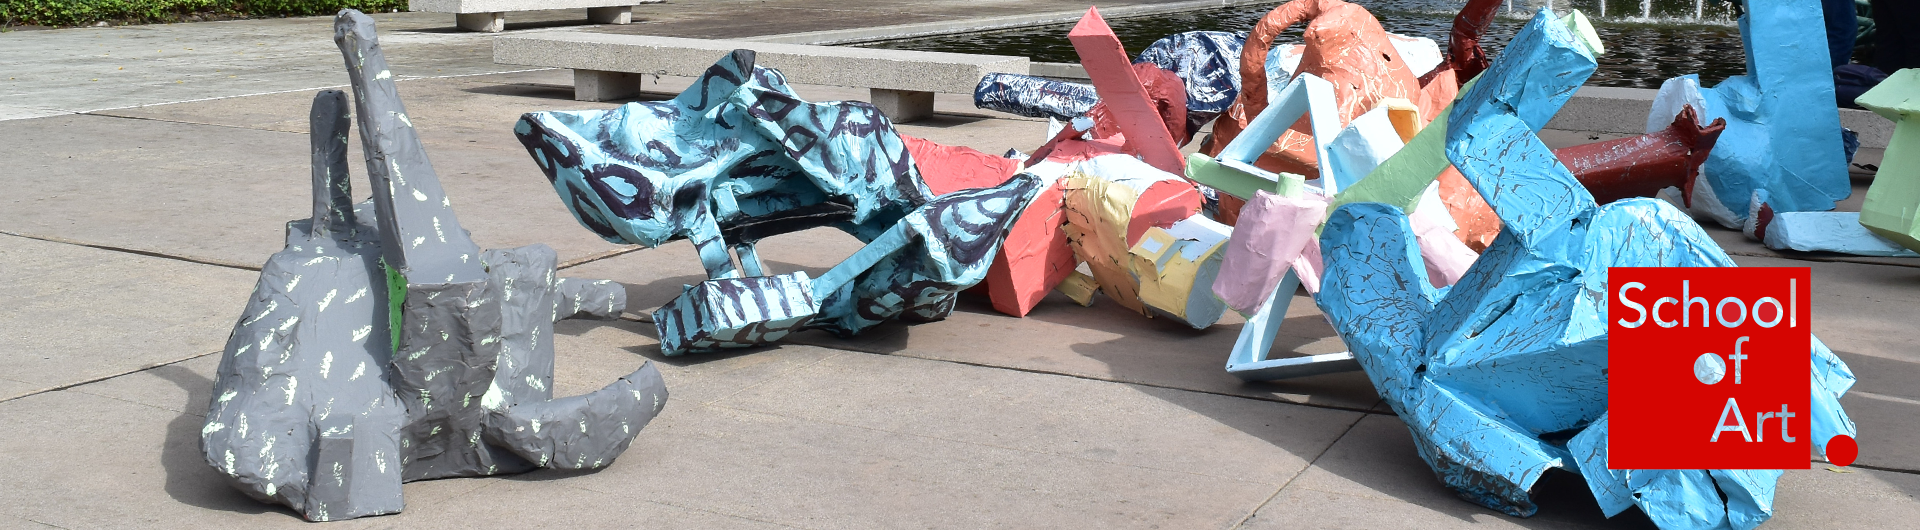 Large, colorful sculptures displayed on an outdoor concrete courtyard